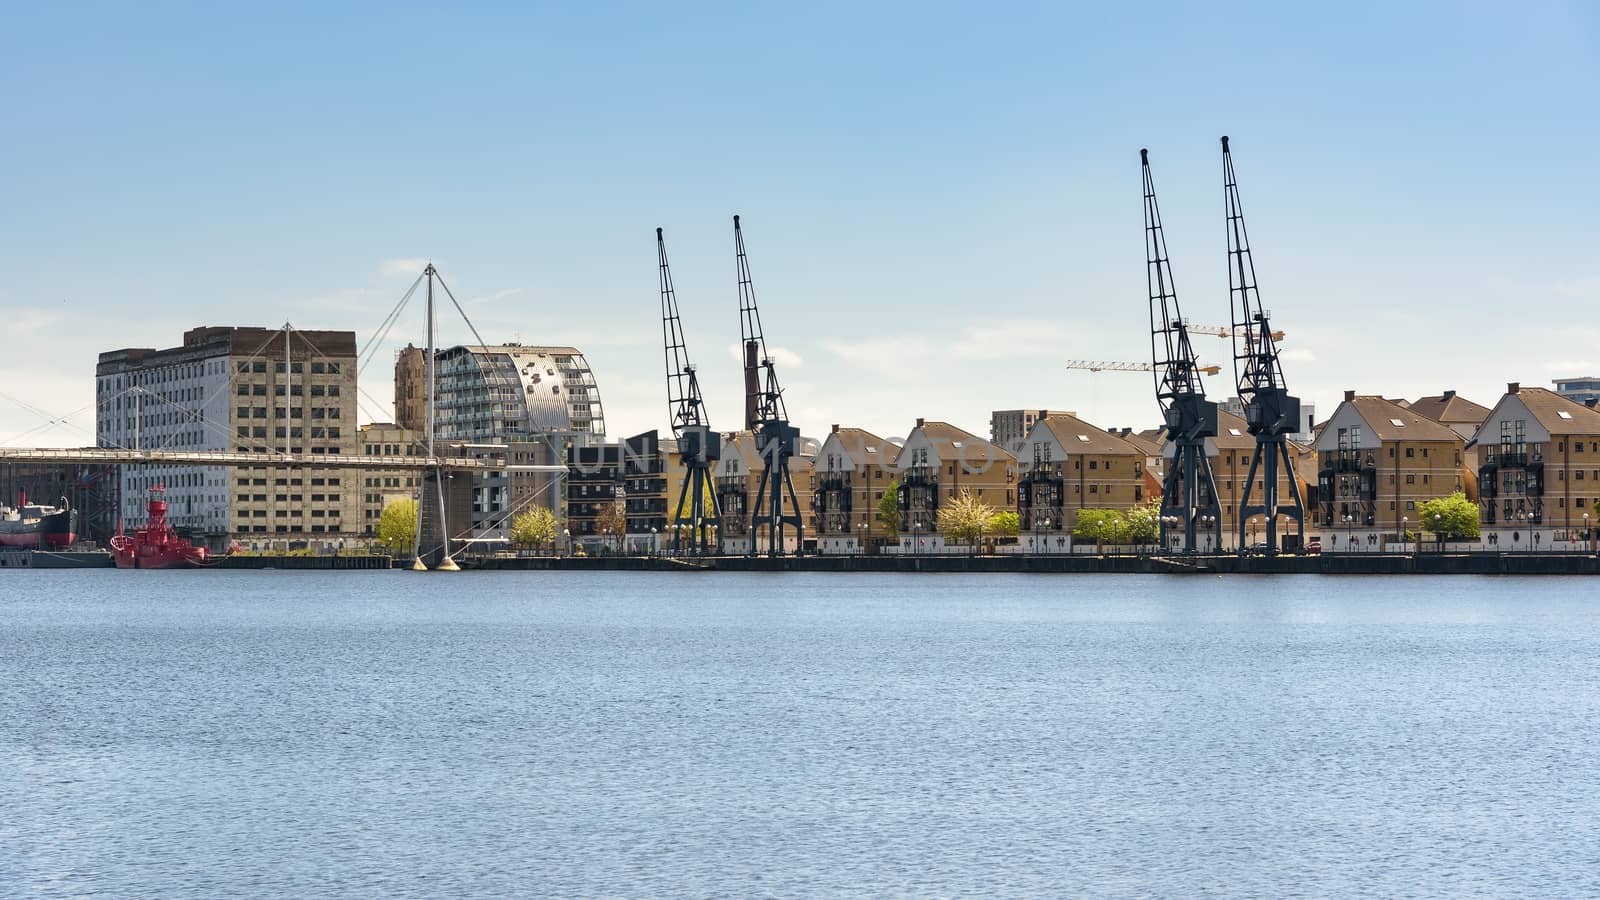 Panoramic view of houses at Royal Victoria Dock in London by mkos83